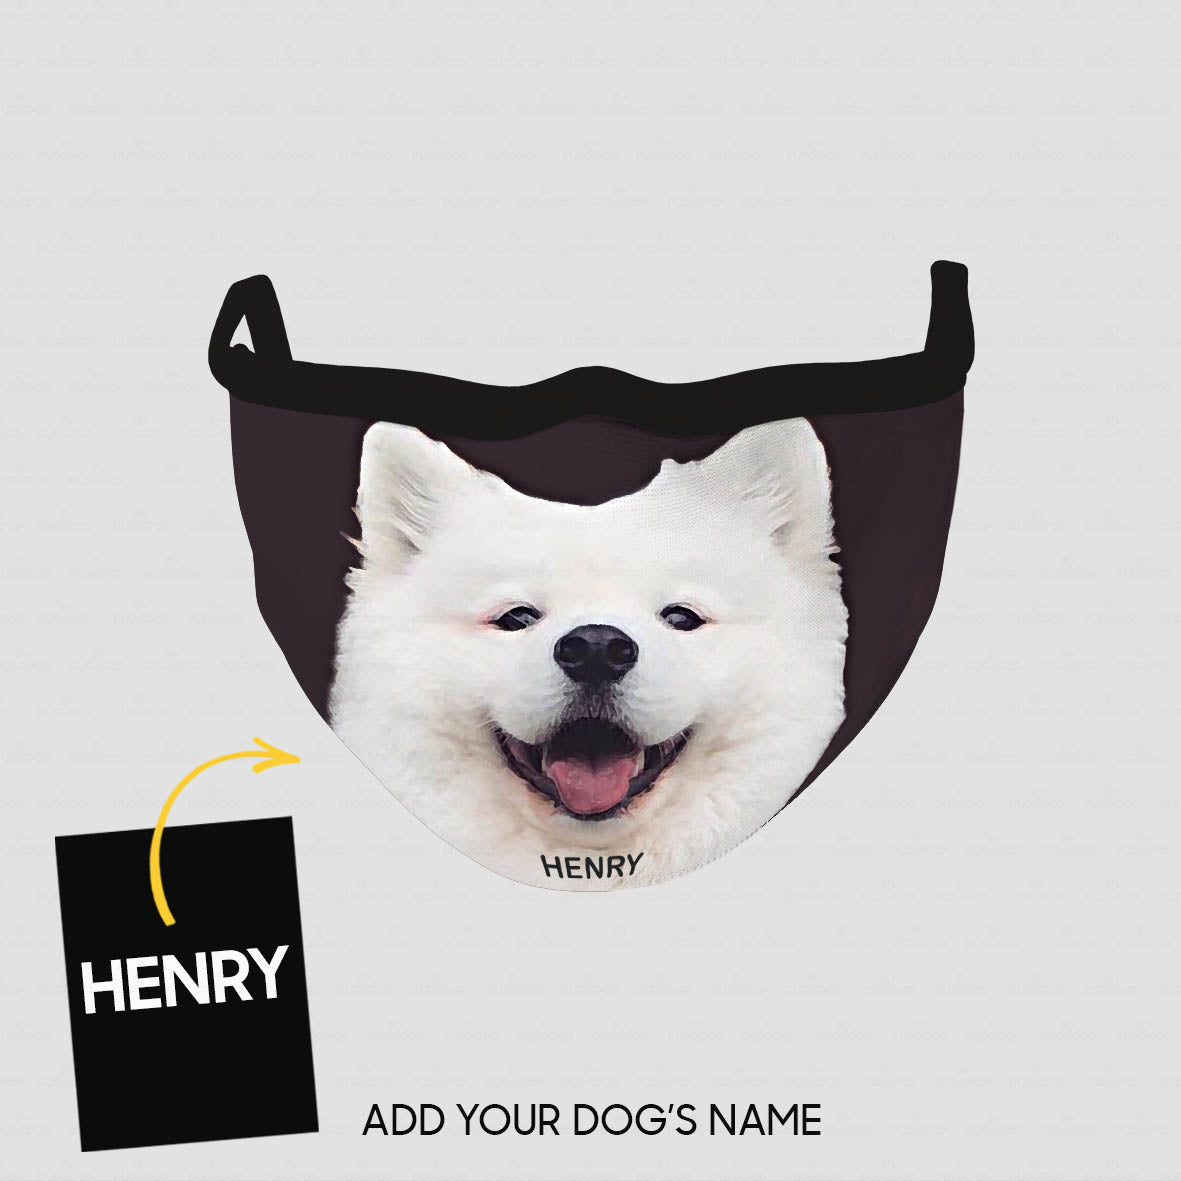 Personalized Dog Gift Idea - Samoyed The Whole Cute Face For Dog Lovers - Cloth Mask